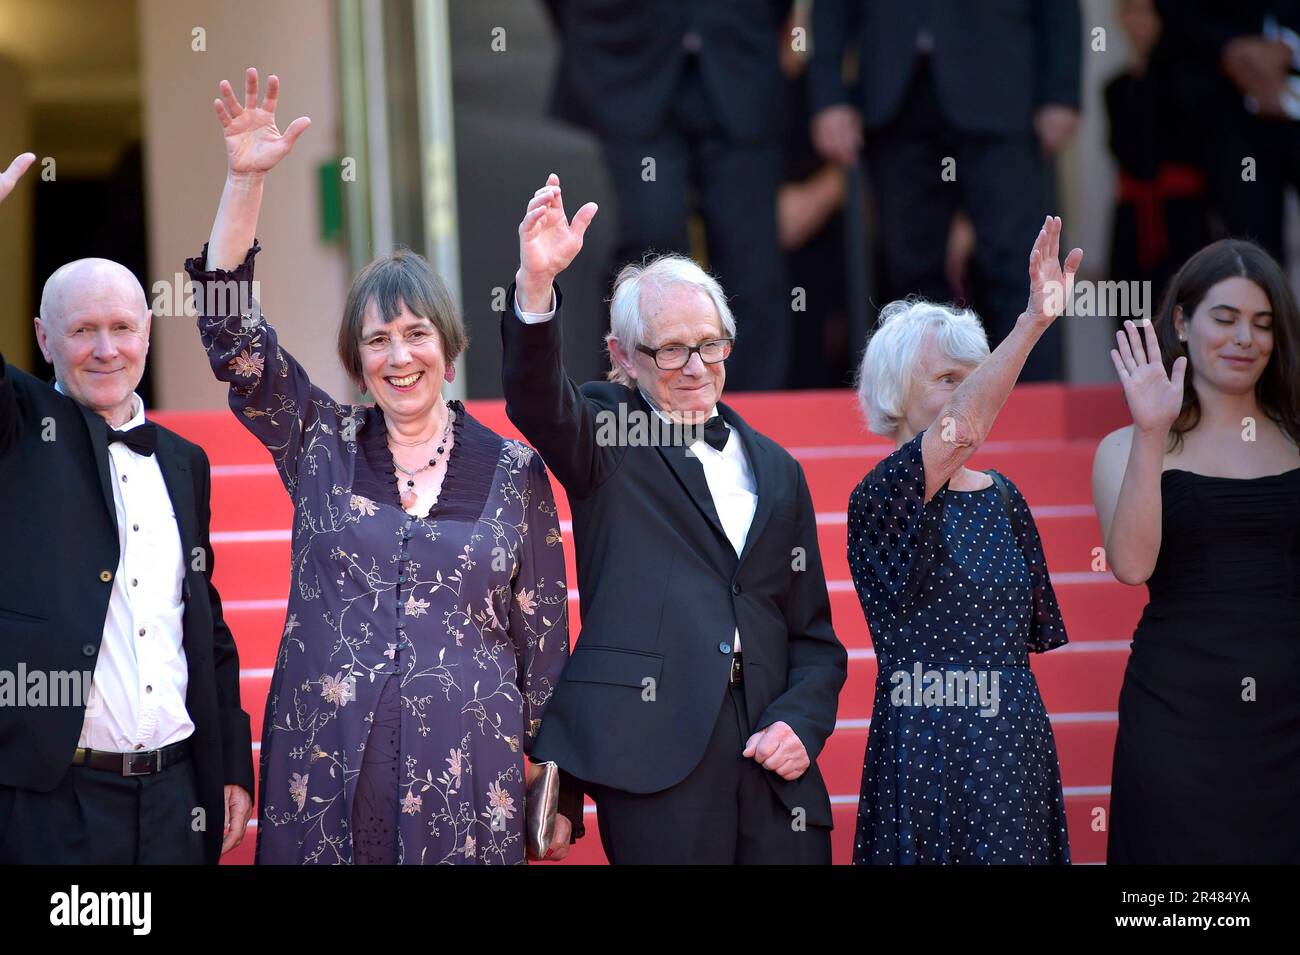 Cannes, France. 26th May, 2023. Paul Laverty, Rebecca O'Brien, Director Ken Loach, Lesley Ashton, Ebla Mari, Dave Turner attend the 'The Old Oak' red carpet during the 76th annual Cannes film festival at Palais des Festivals in Cannes, France on Friday, May 26, 2023. Photo by Rocco Spaziani/ Credit: UPI/Alamy Live News Stock Photo